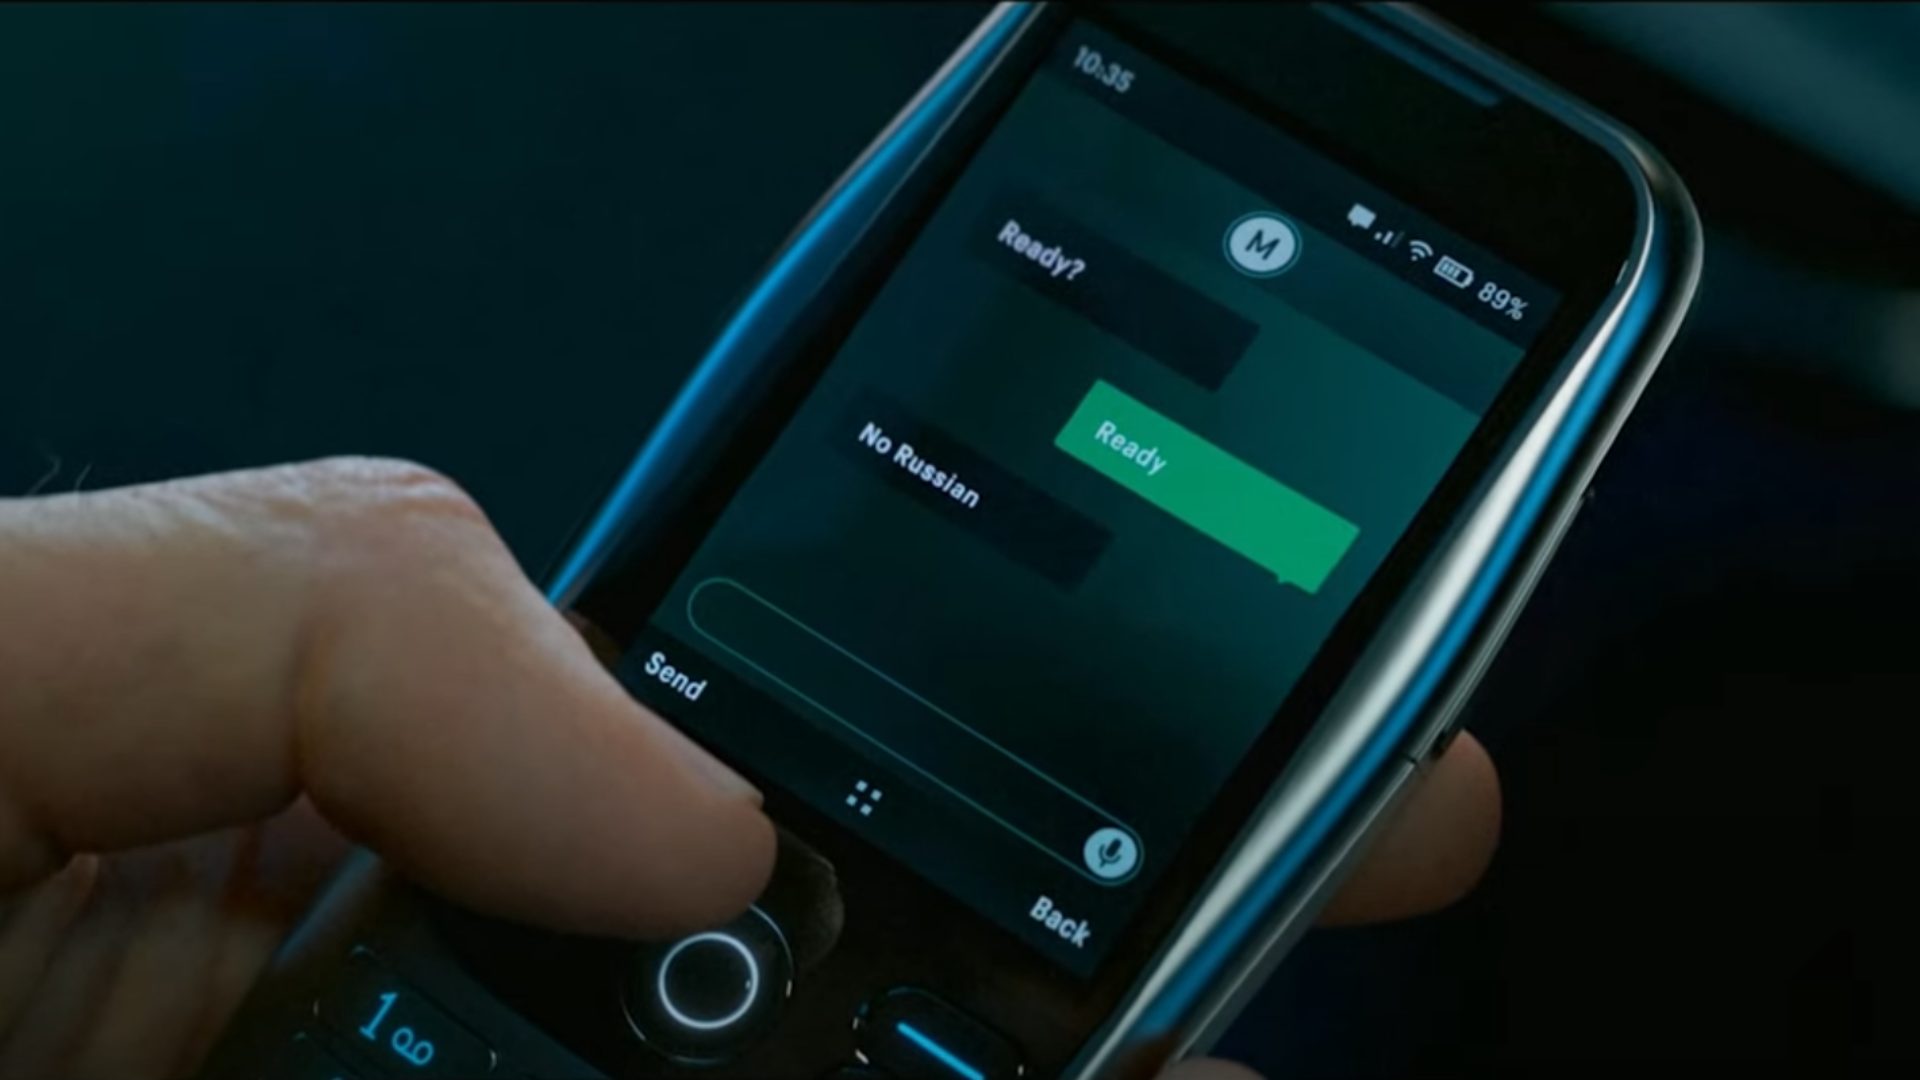 MW3 No Russian: a mobile phone displaying several messages, including one that reads 